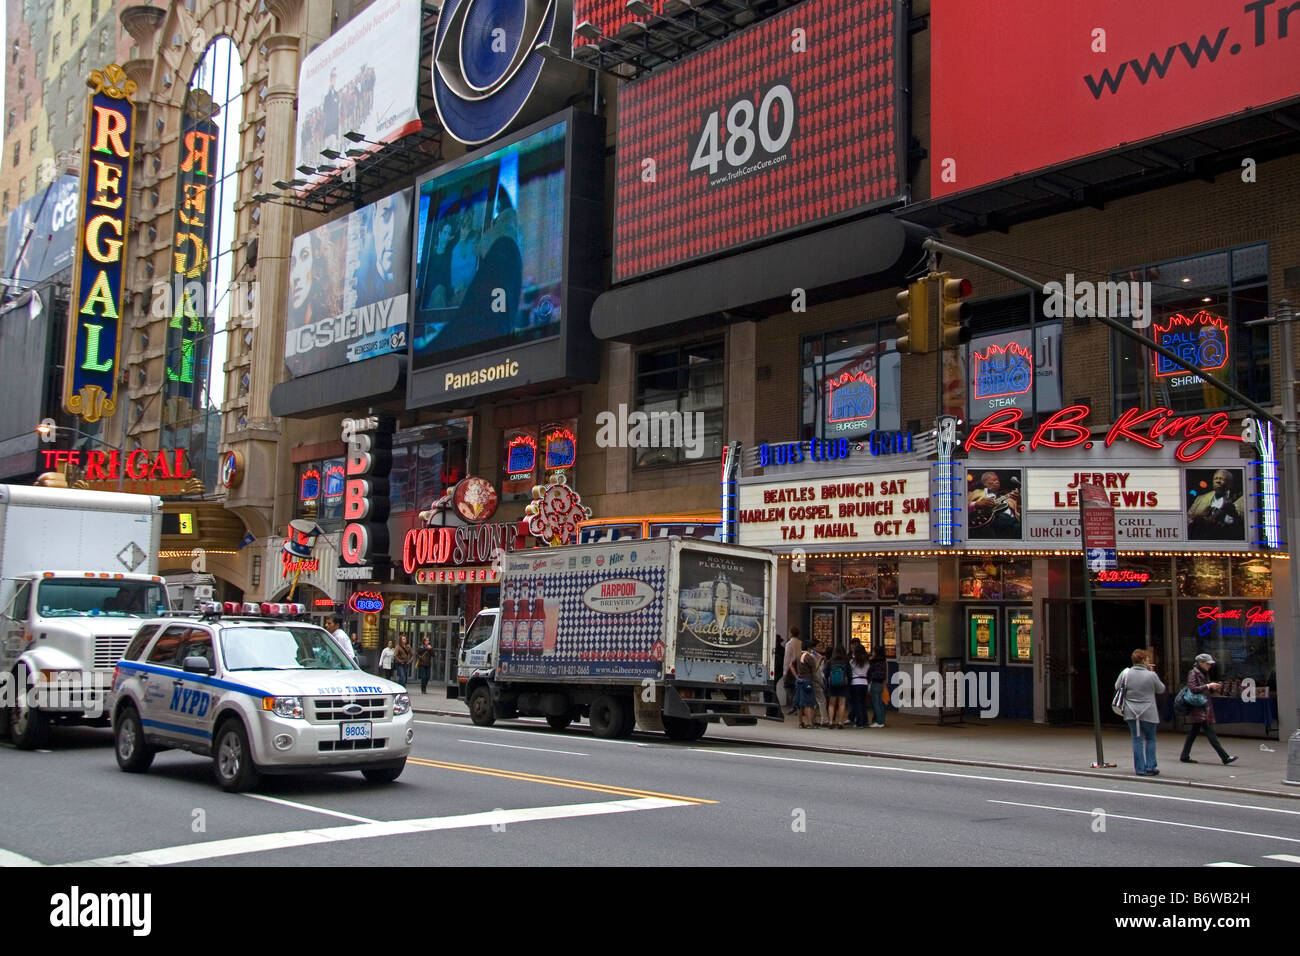 Am Times Square West 42nd Street in Manhattan New York City New York USA Stockfoto